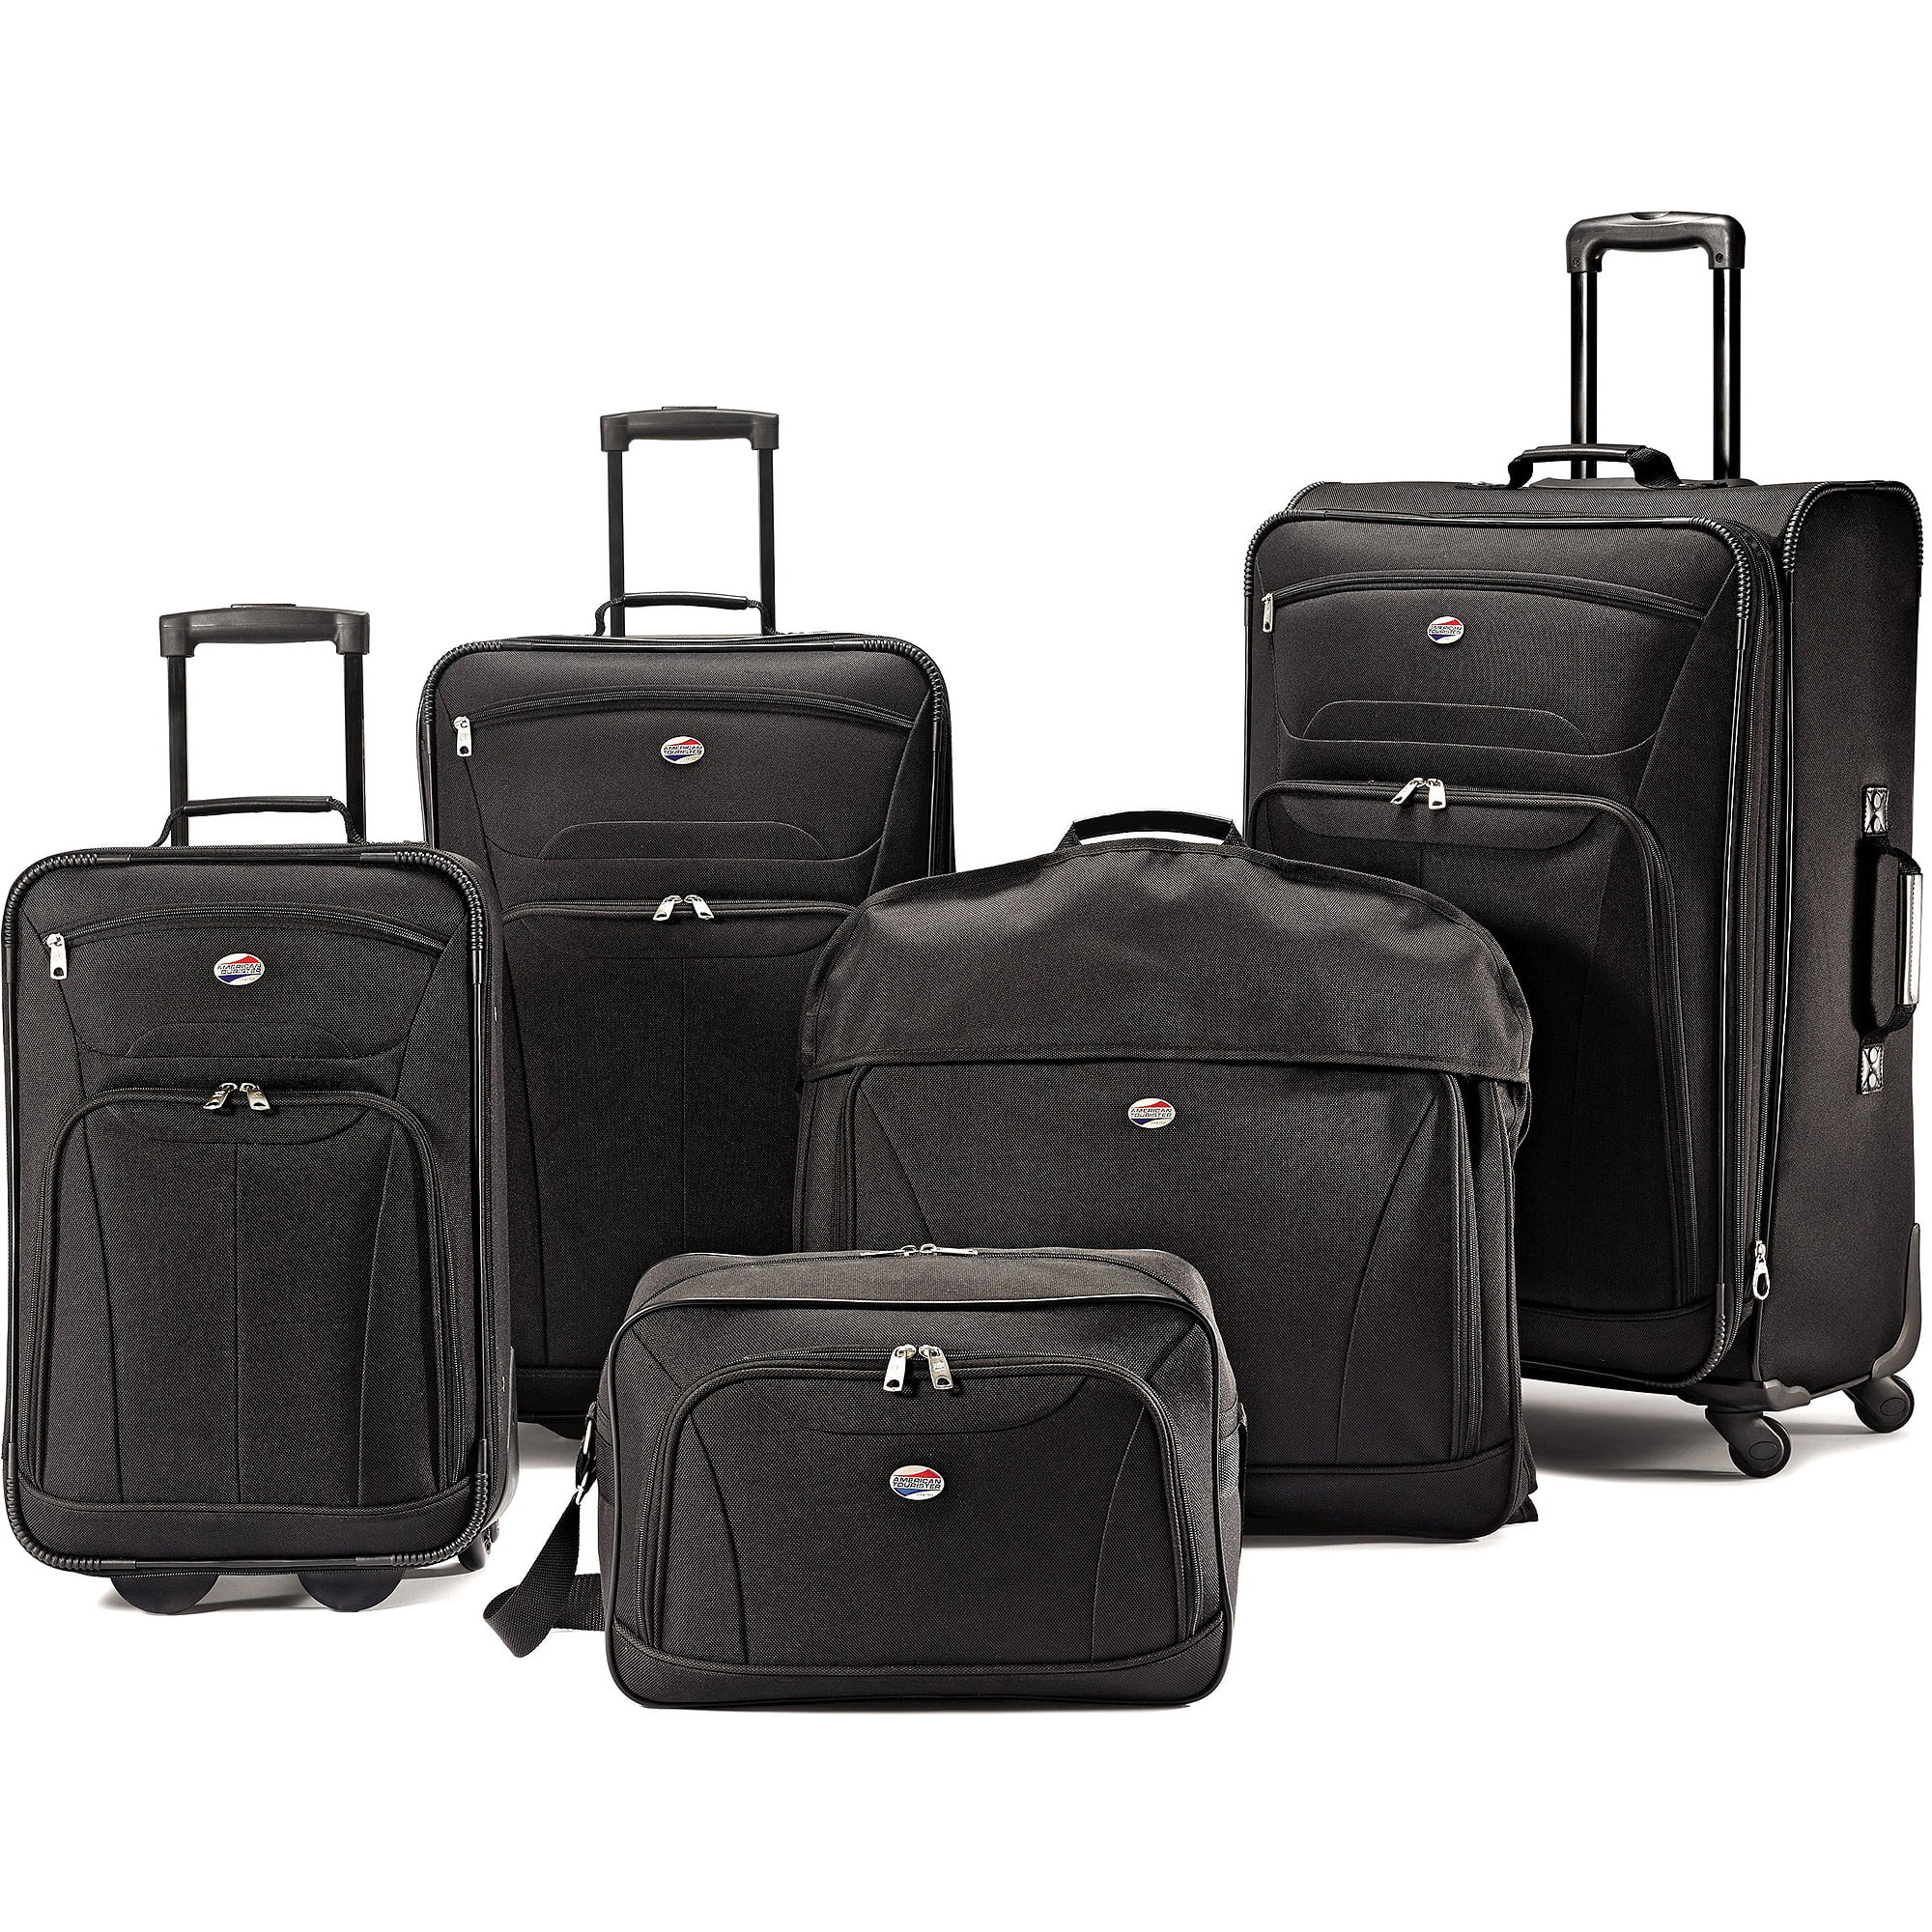 Luggage - Every Day Low Prices | Walmart.com